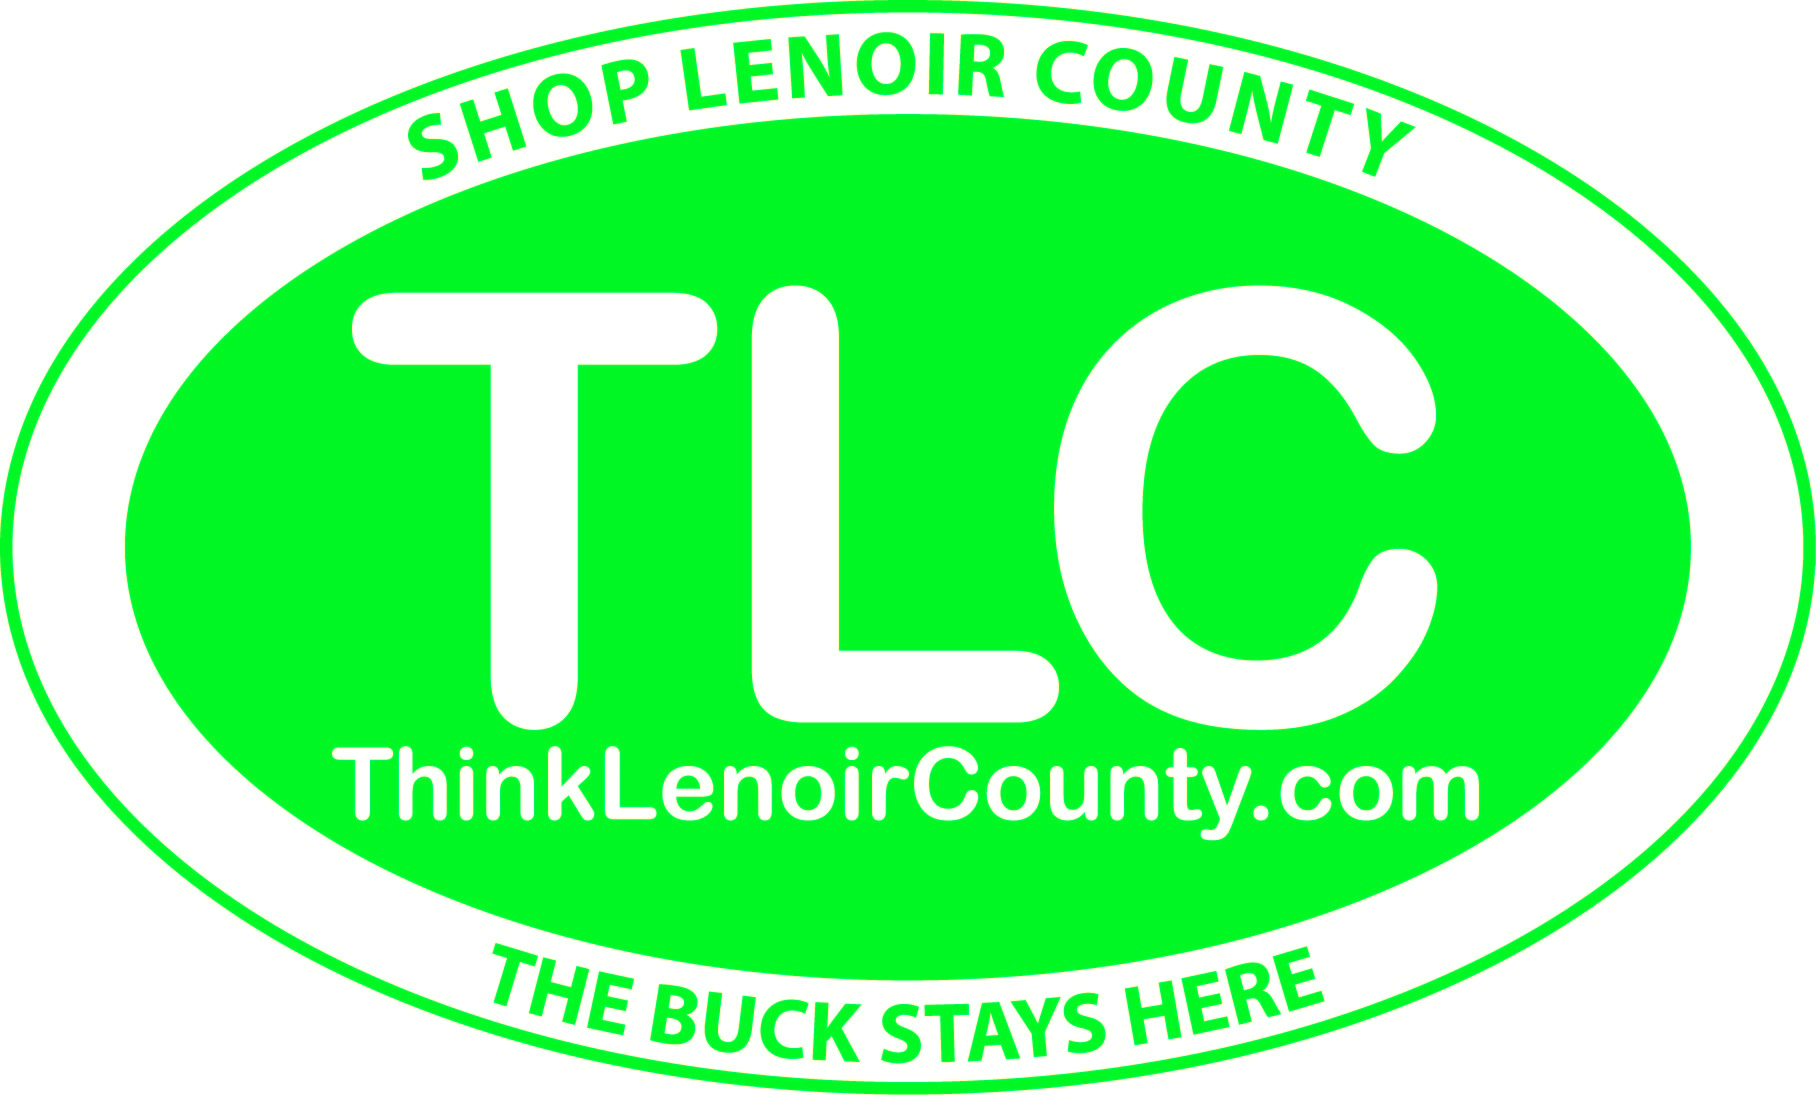 Green Oval Logo - Think Lenoir County - TLC in Businesses